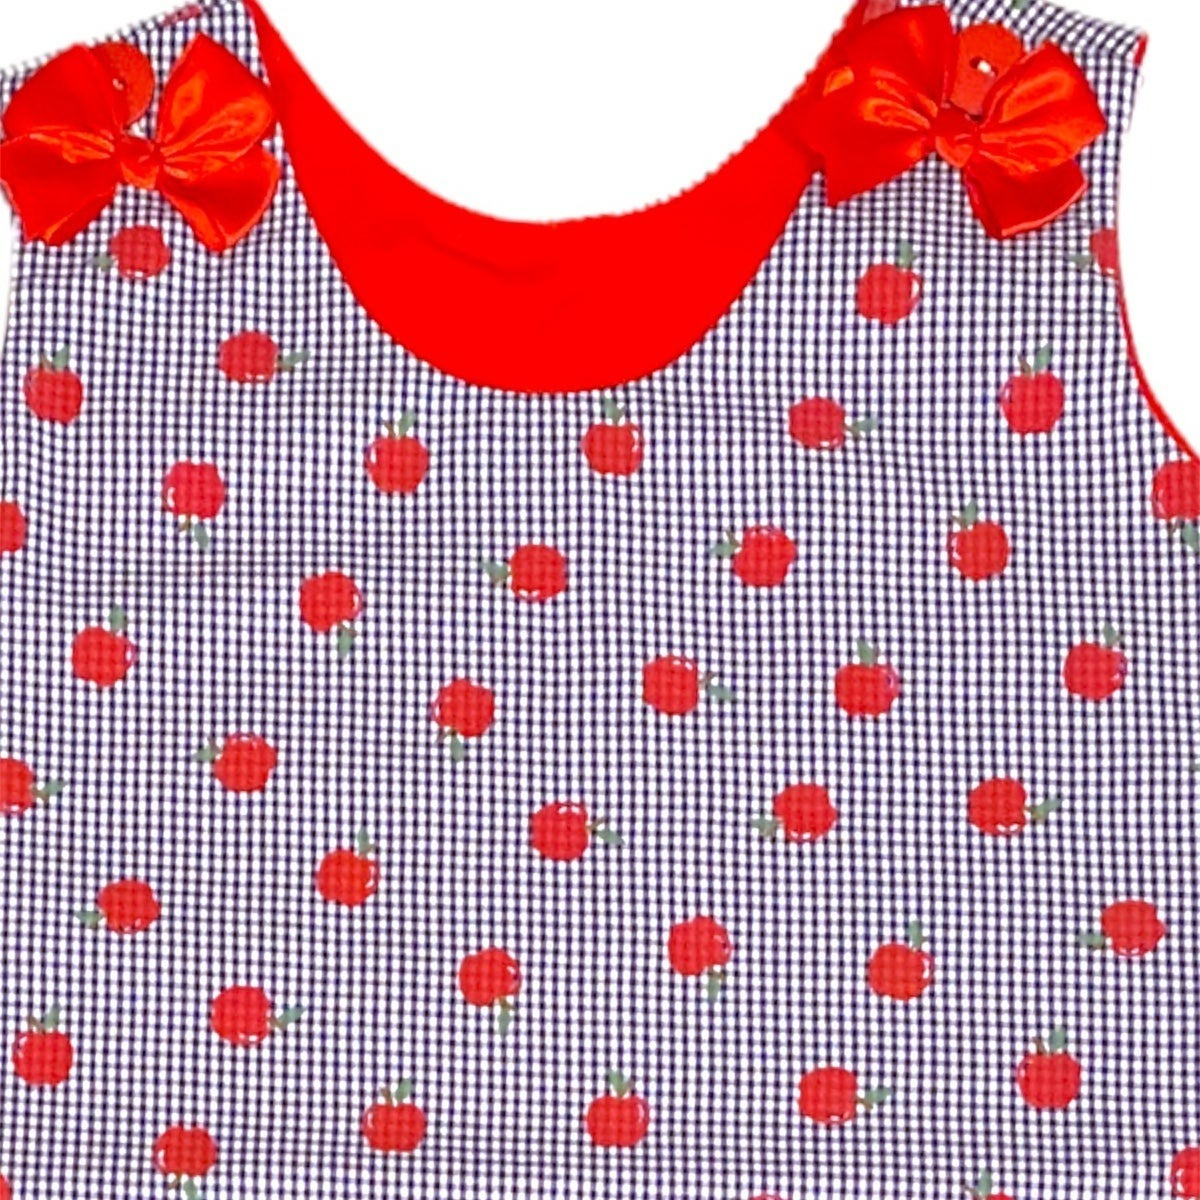 New size 3 Apple dress for school or fall